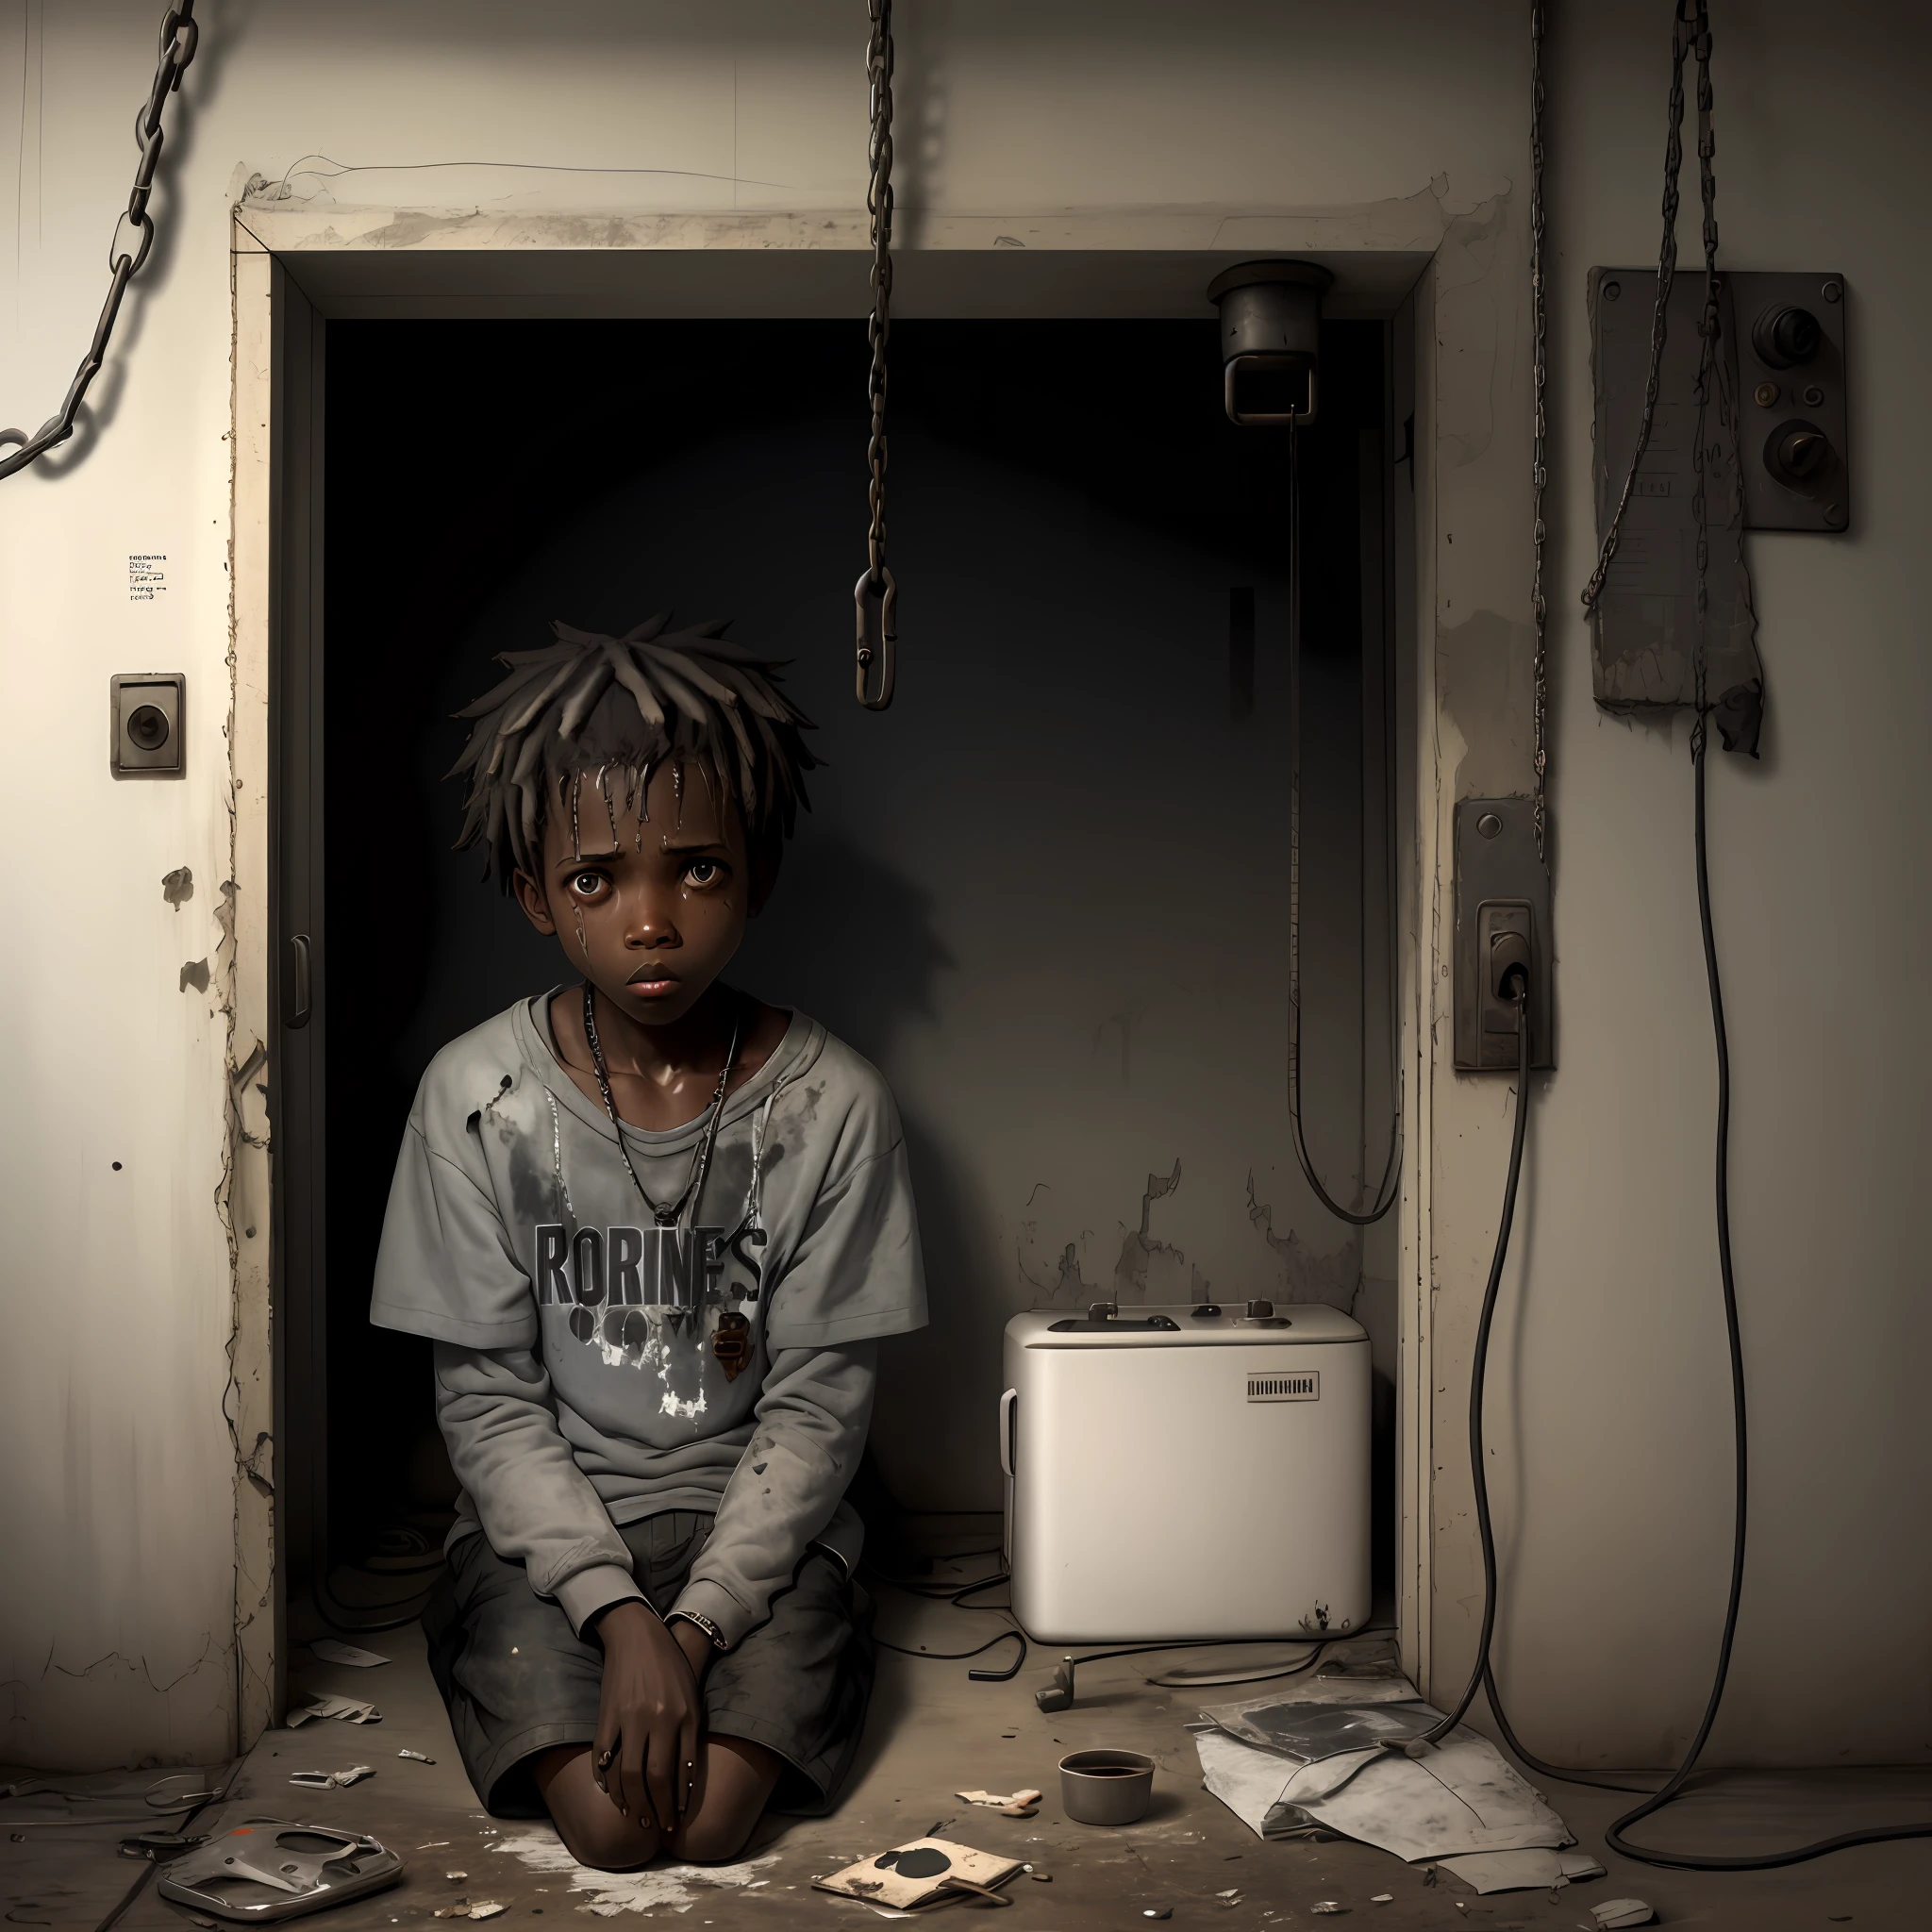 A sick and bitter black boy, desperate; sitting in the dangerous electric chair, in decaying clothes, crumbs of fear hanging in the air; in a dark, chained, dirty room.